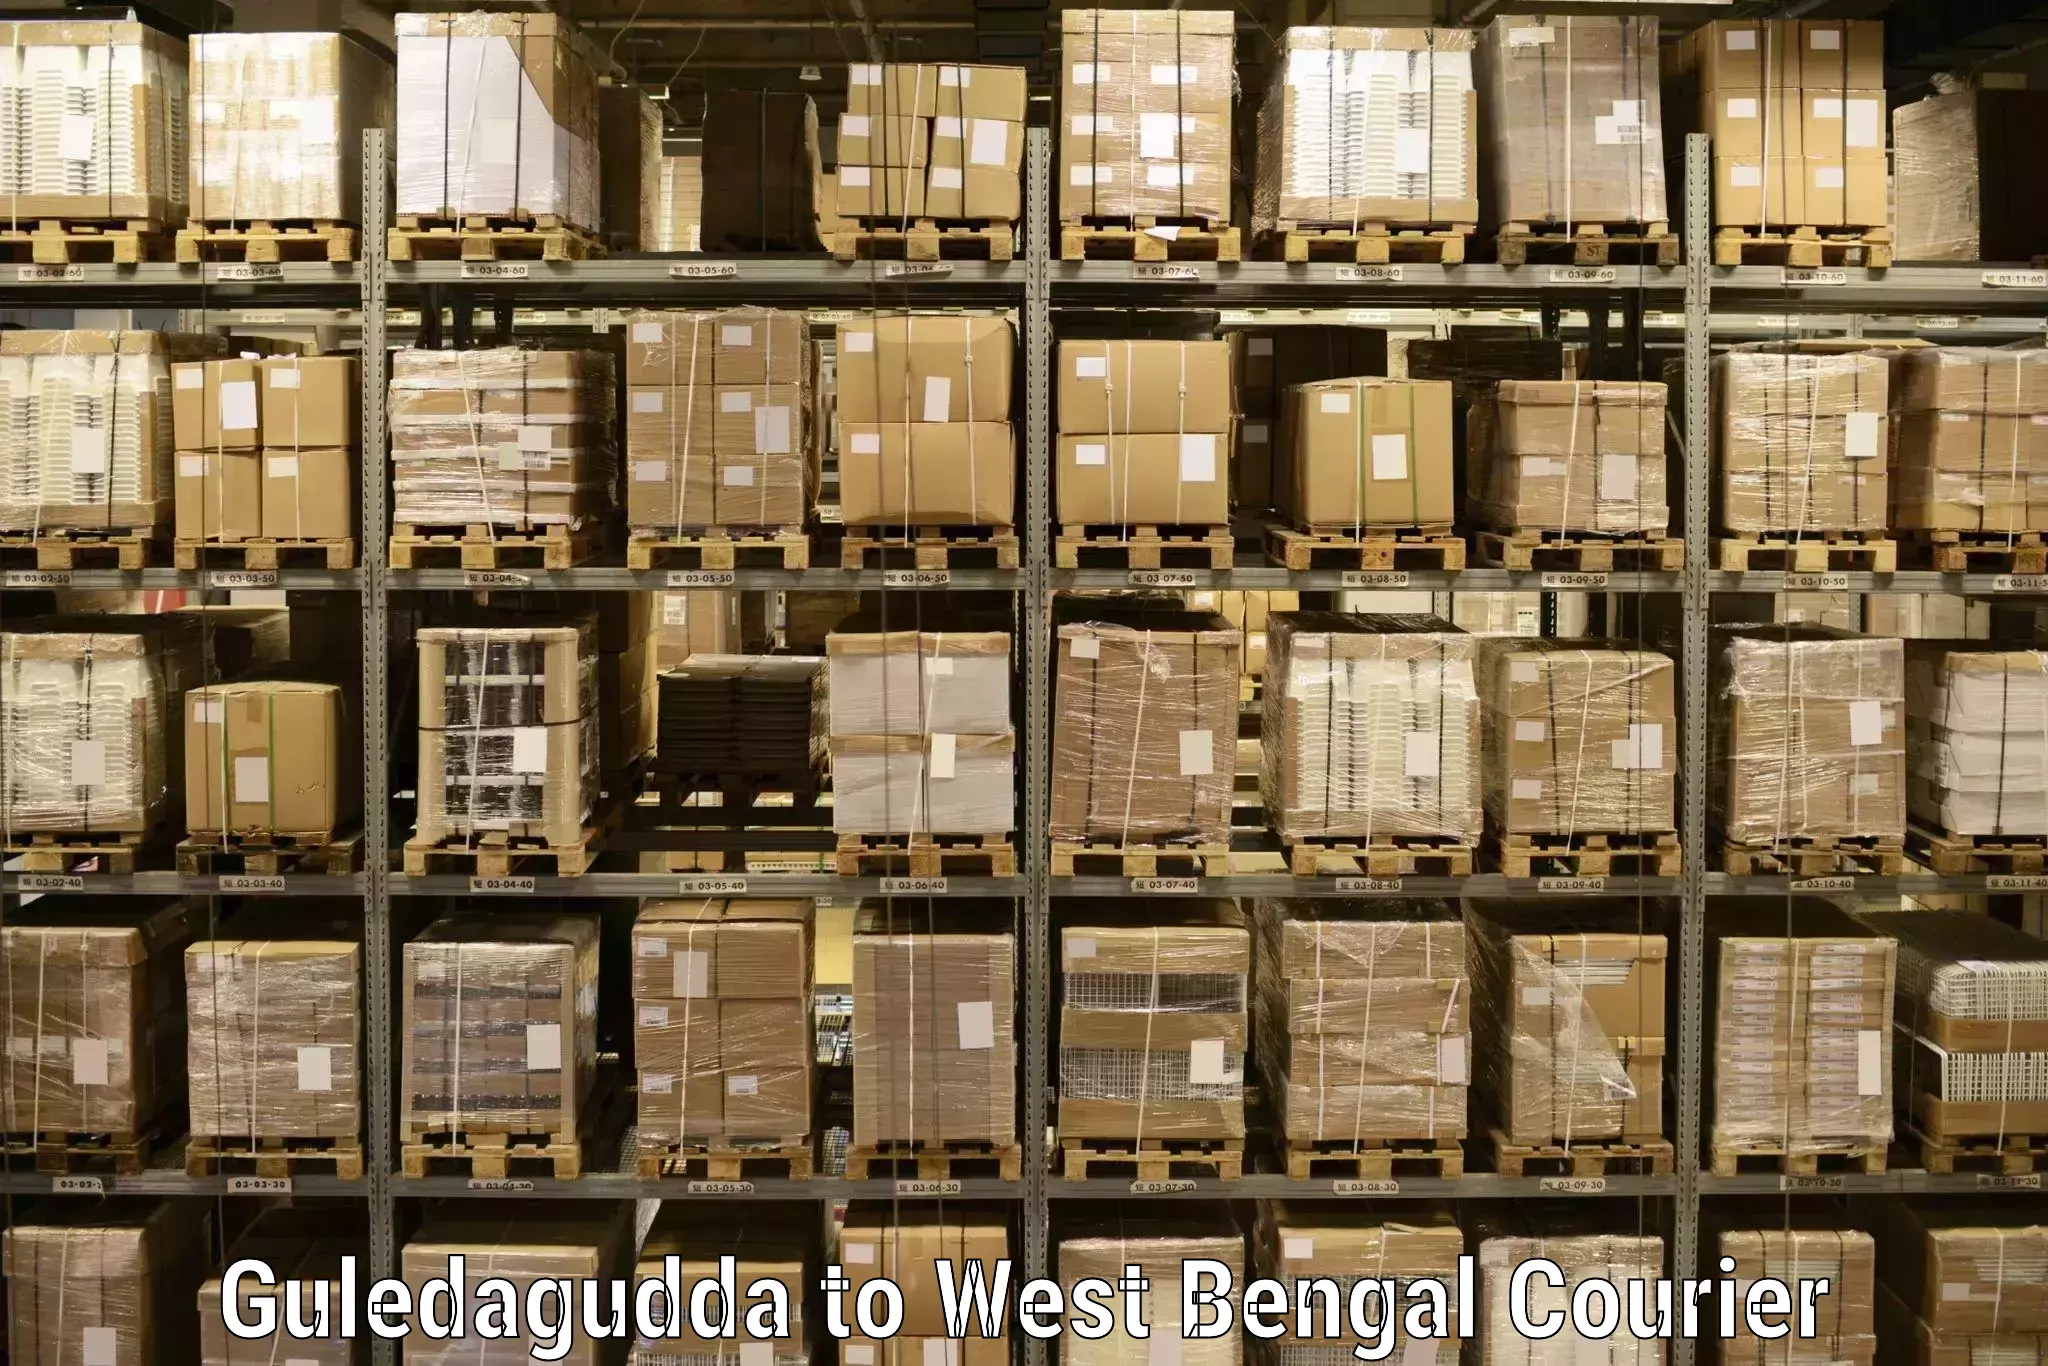 Courier service comparison Guledagudda to Hooghly